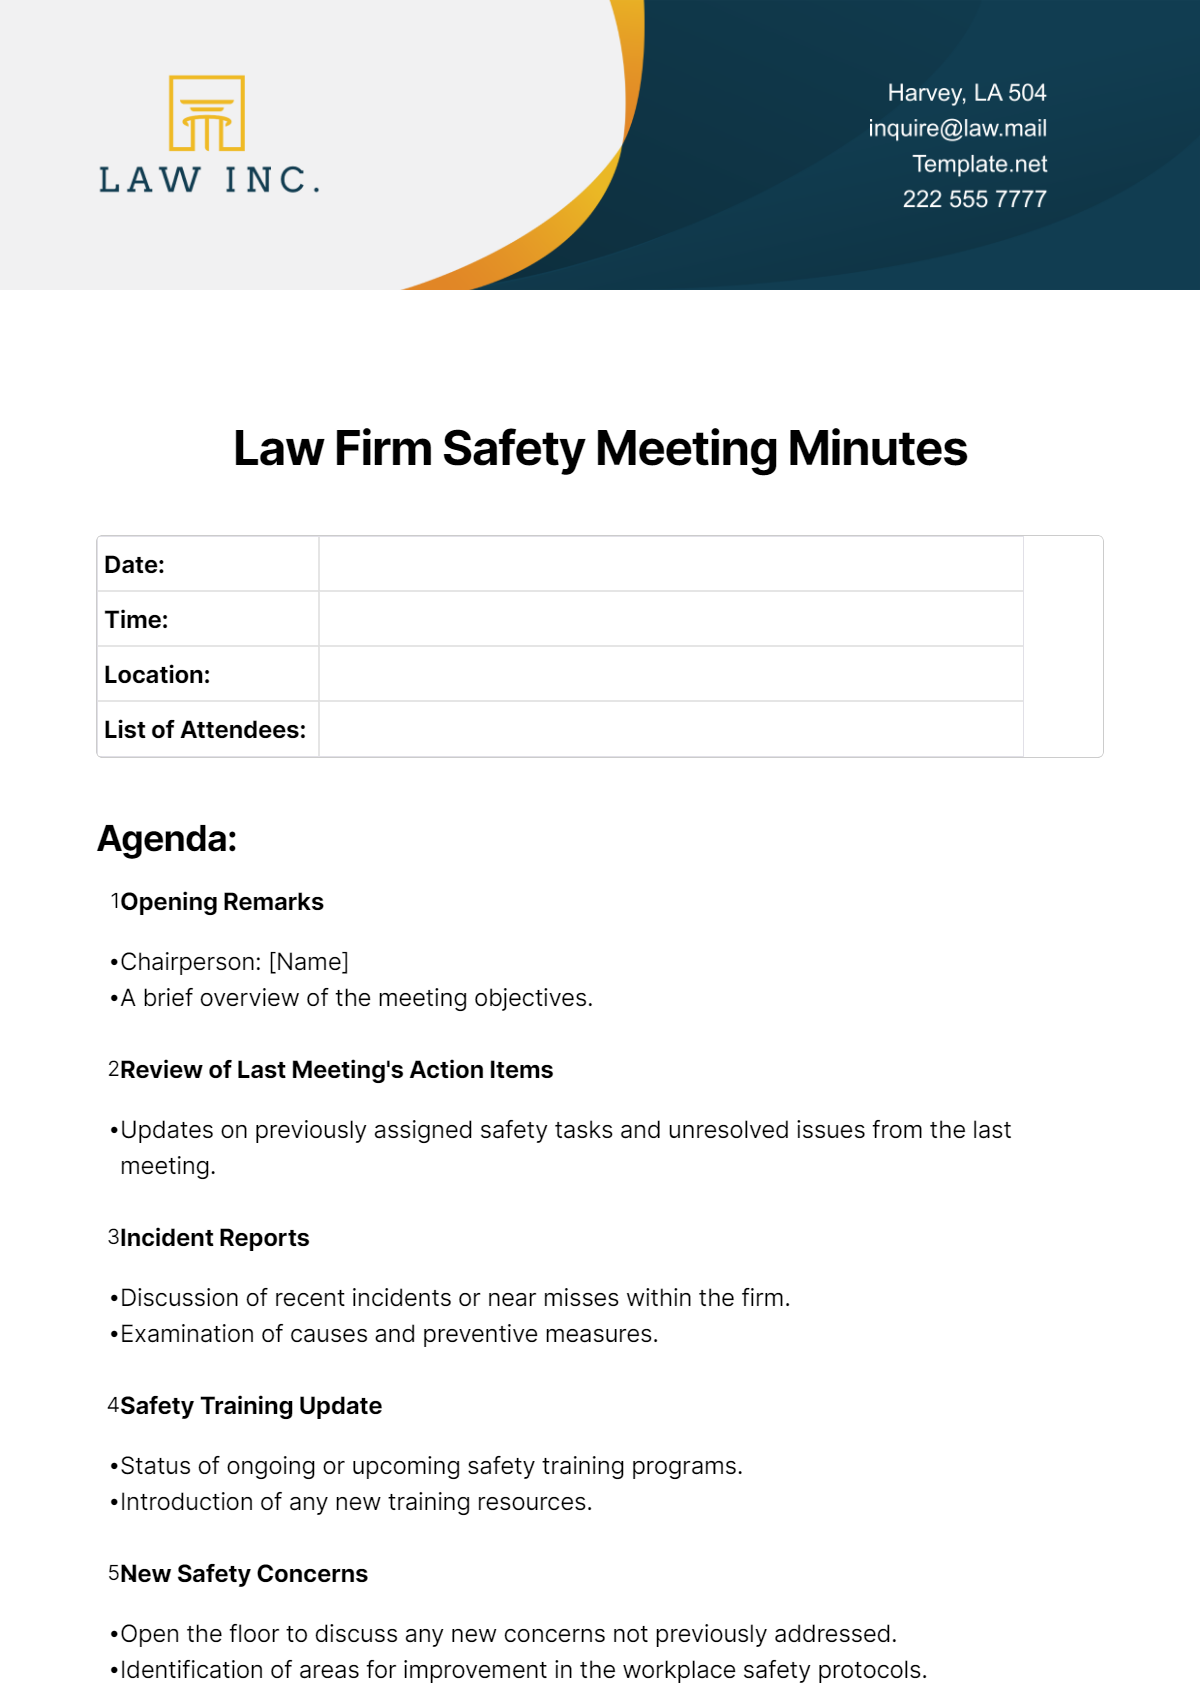 Law Firm Safety Meeting Minutes Template